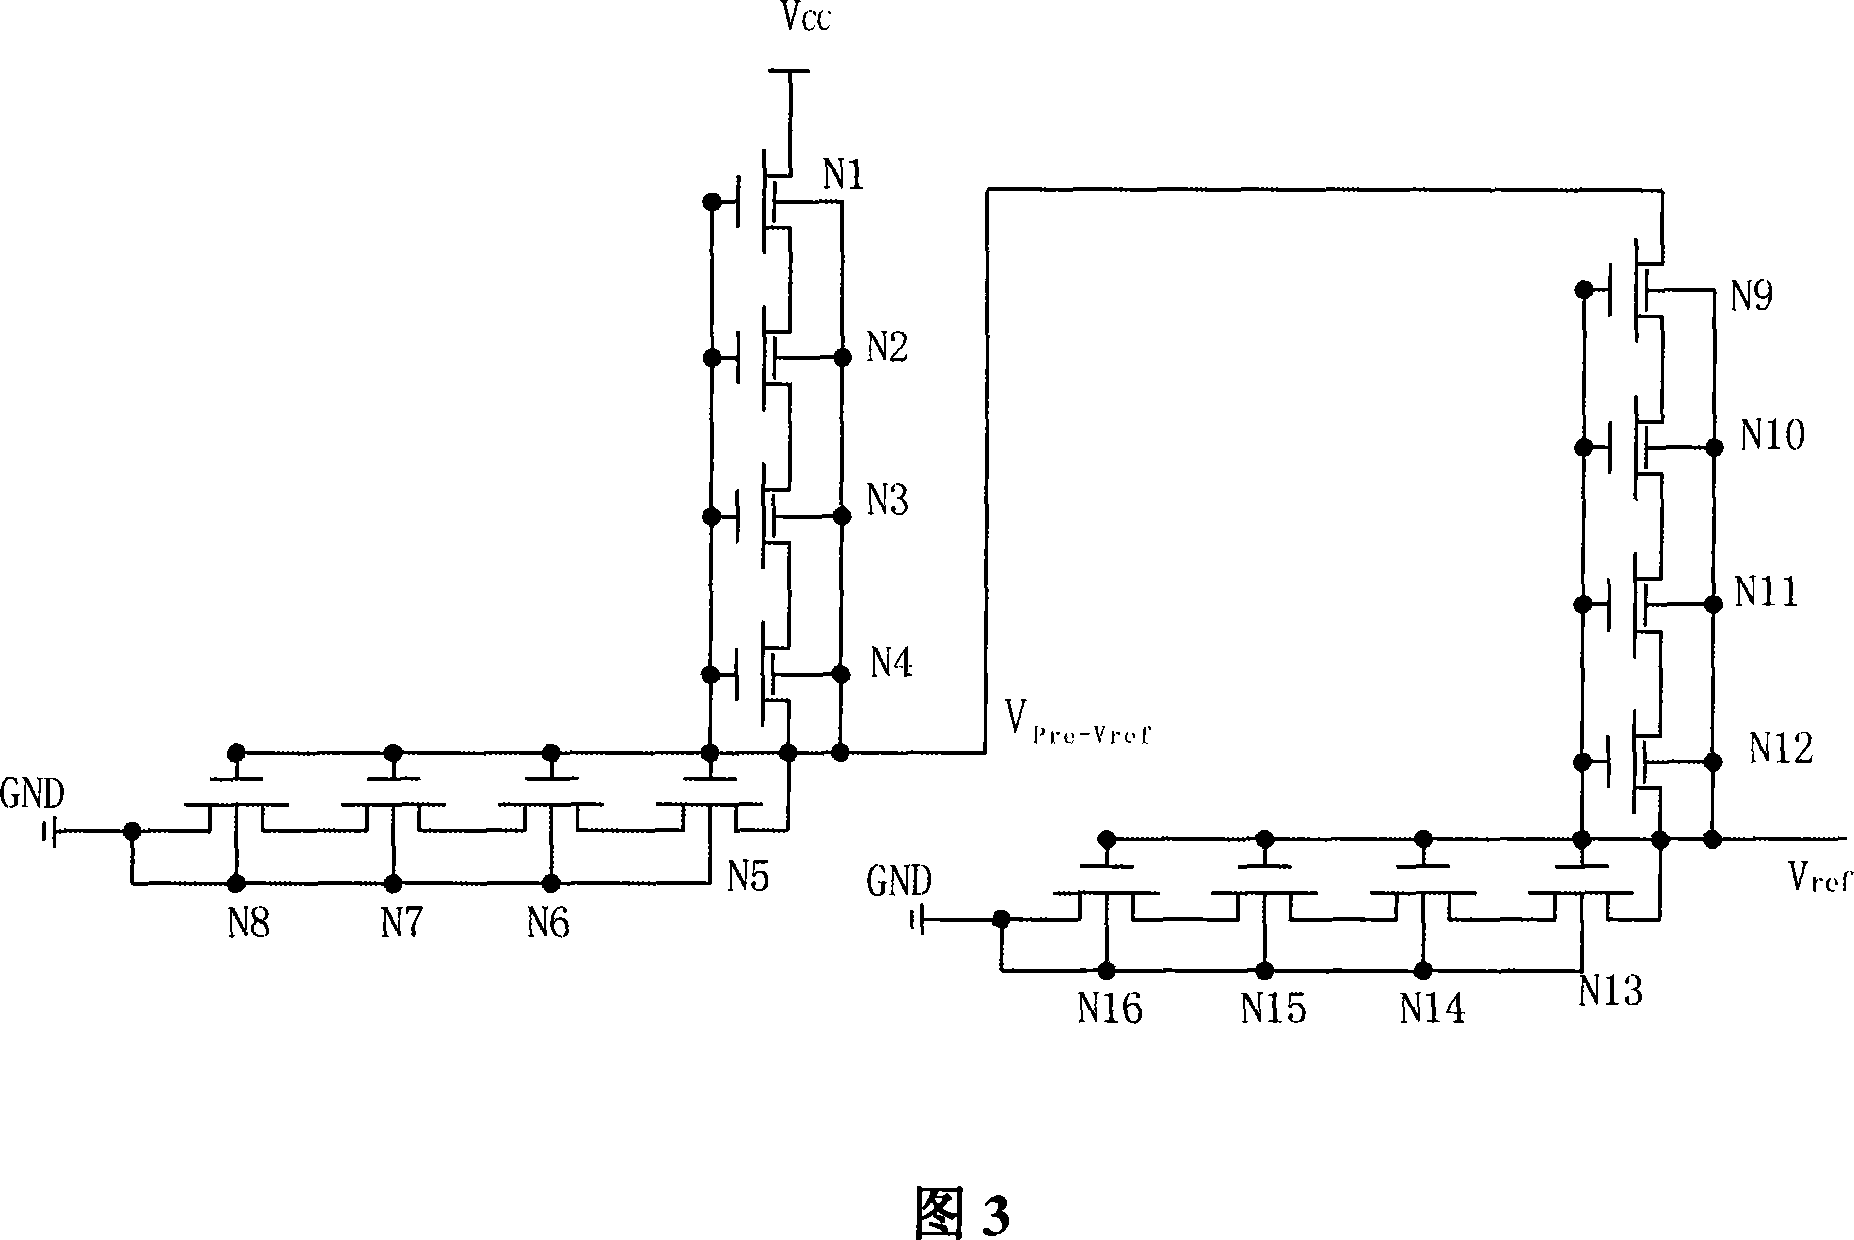 E/D NMOS reference voltage source with high electric power rejection ratio